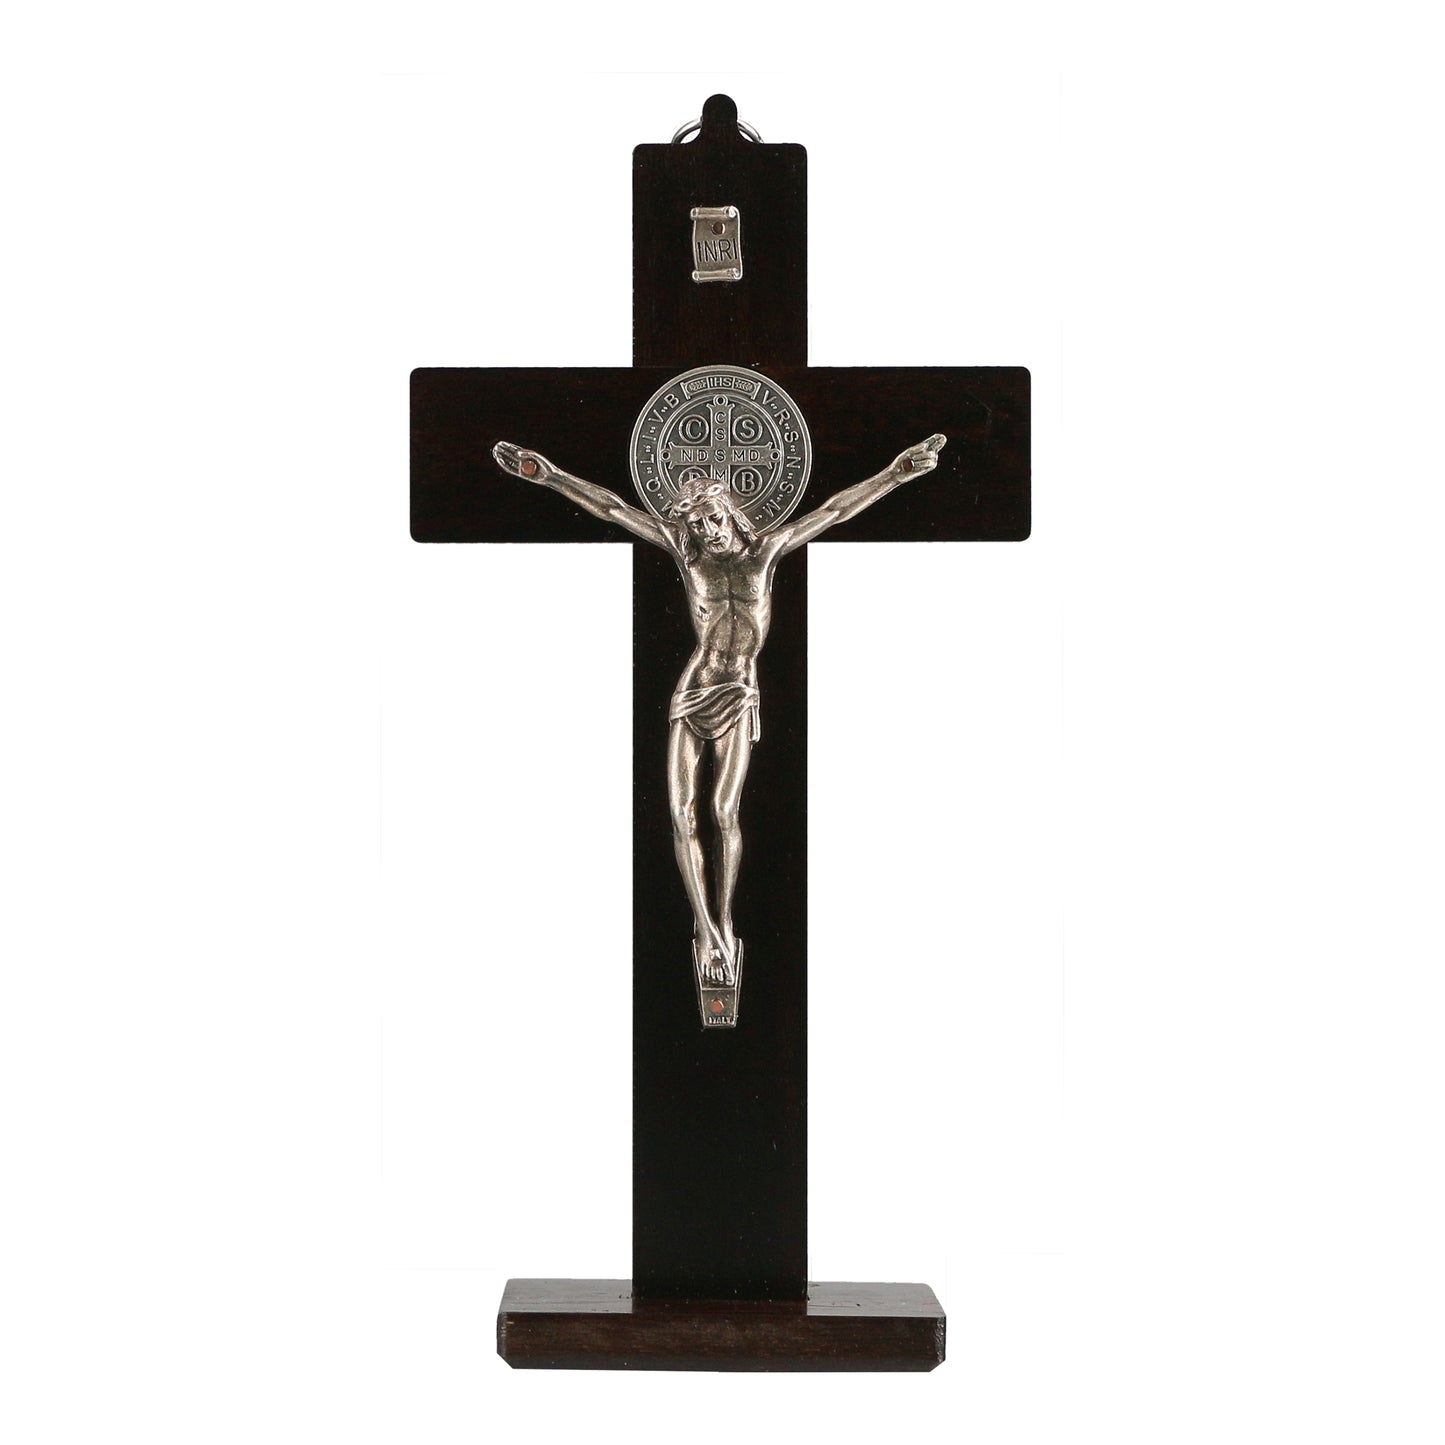 Crucifix – Wall Hanging/Stand Wooden Cross With Saint Benedict Medal (Dark Walnut Wood)